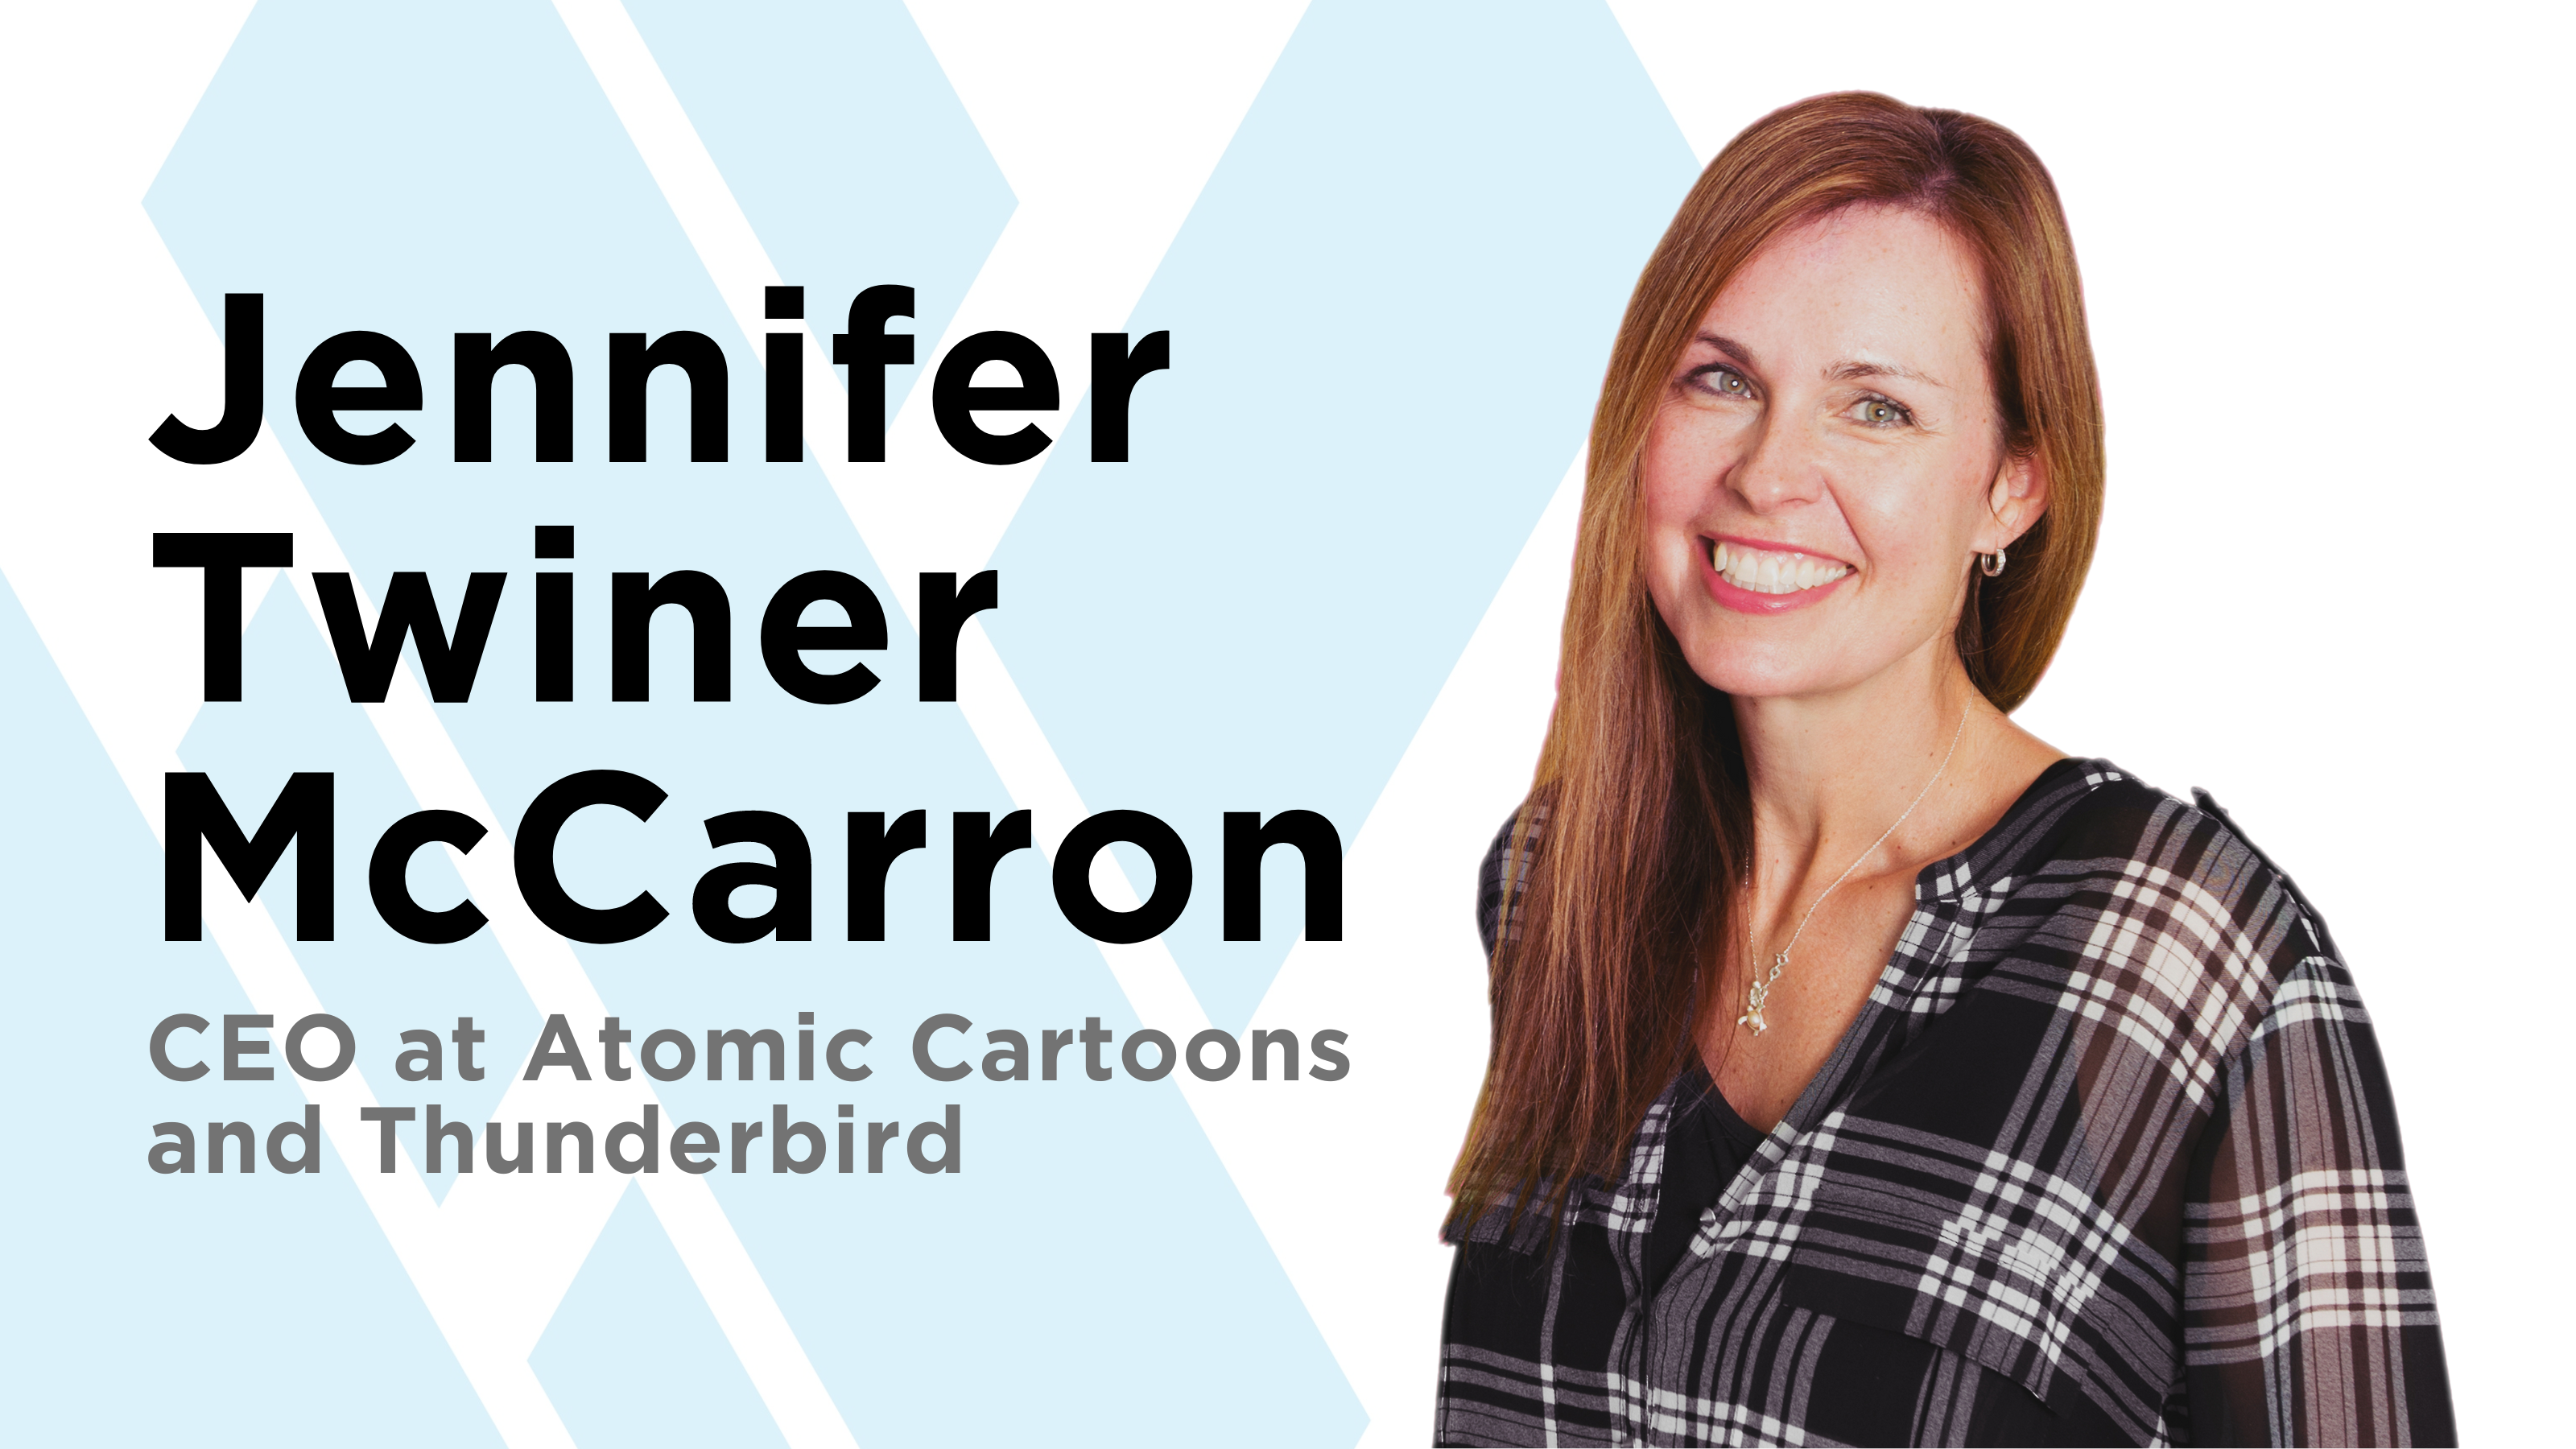 One-to-one with Jennifer Twiner McCarron - Blog